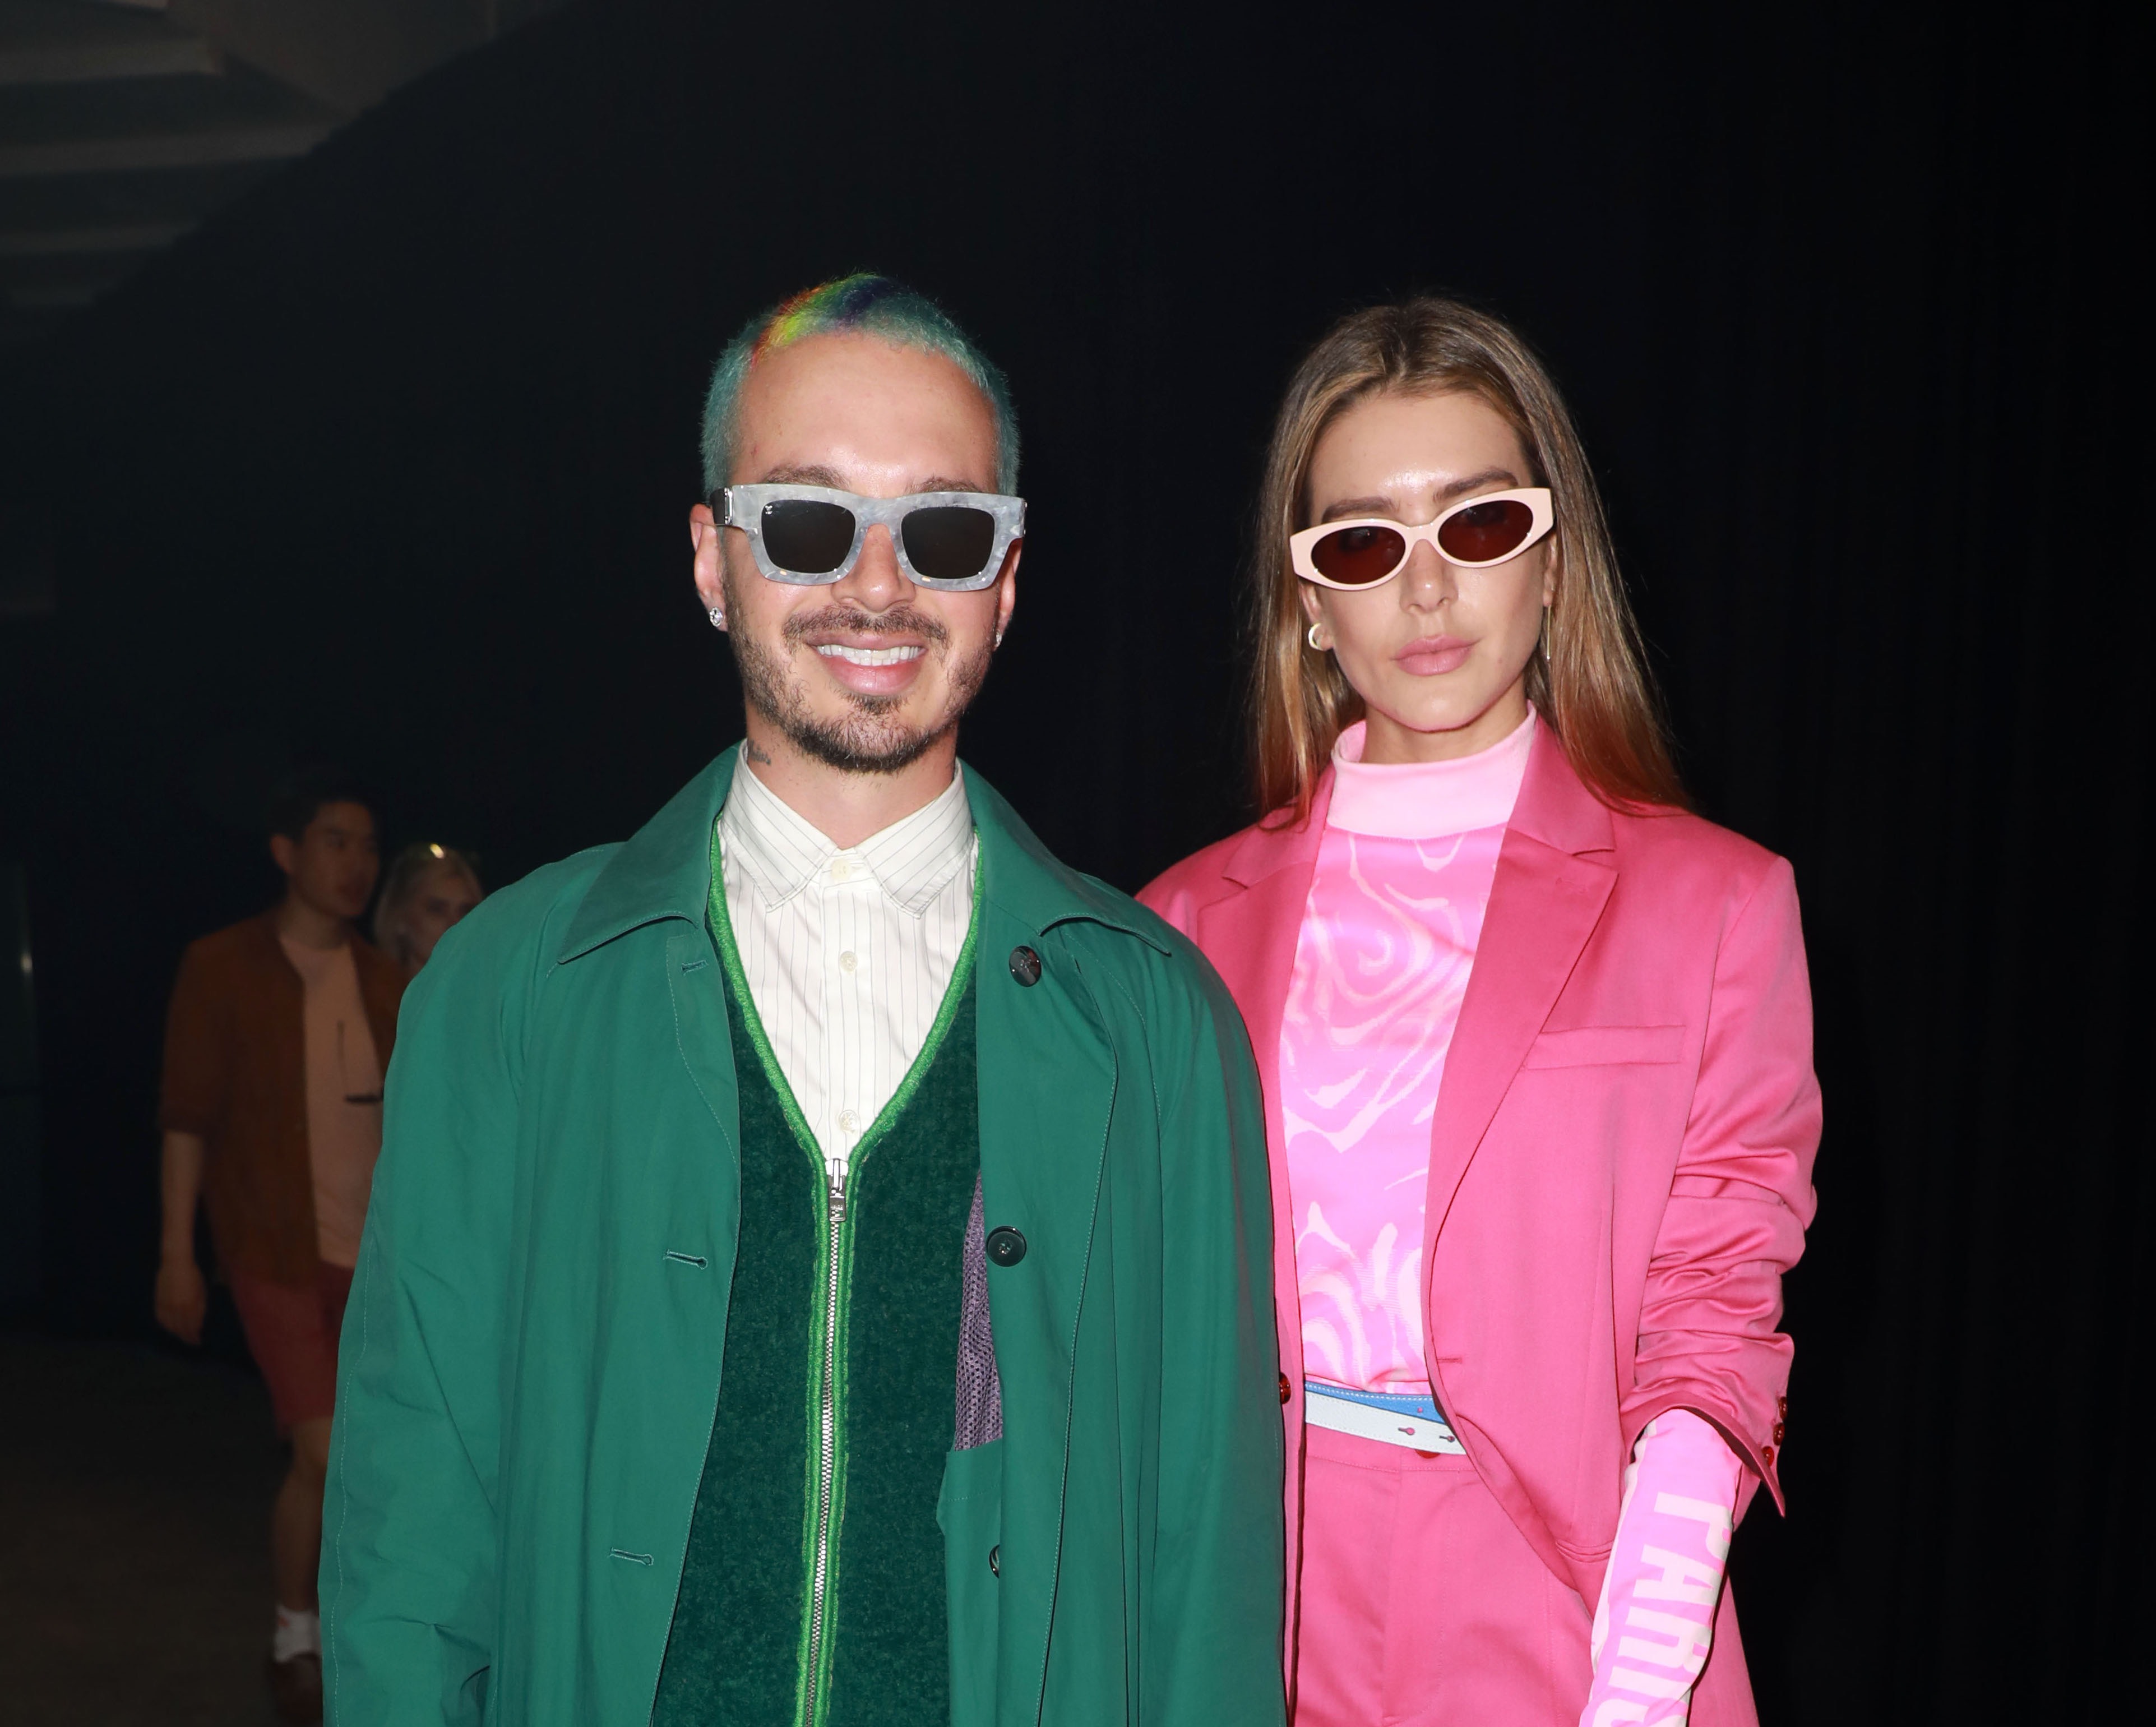 Commentary: J Balvin and Tokischa's 'Perra' video removed from